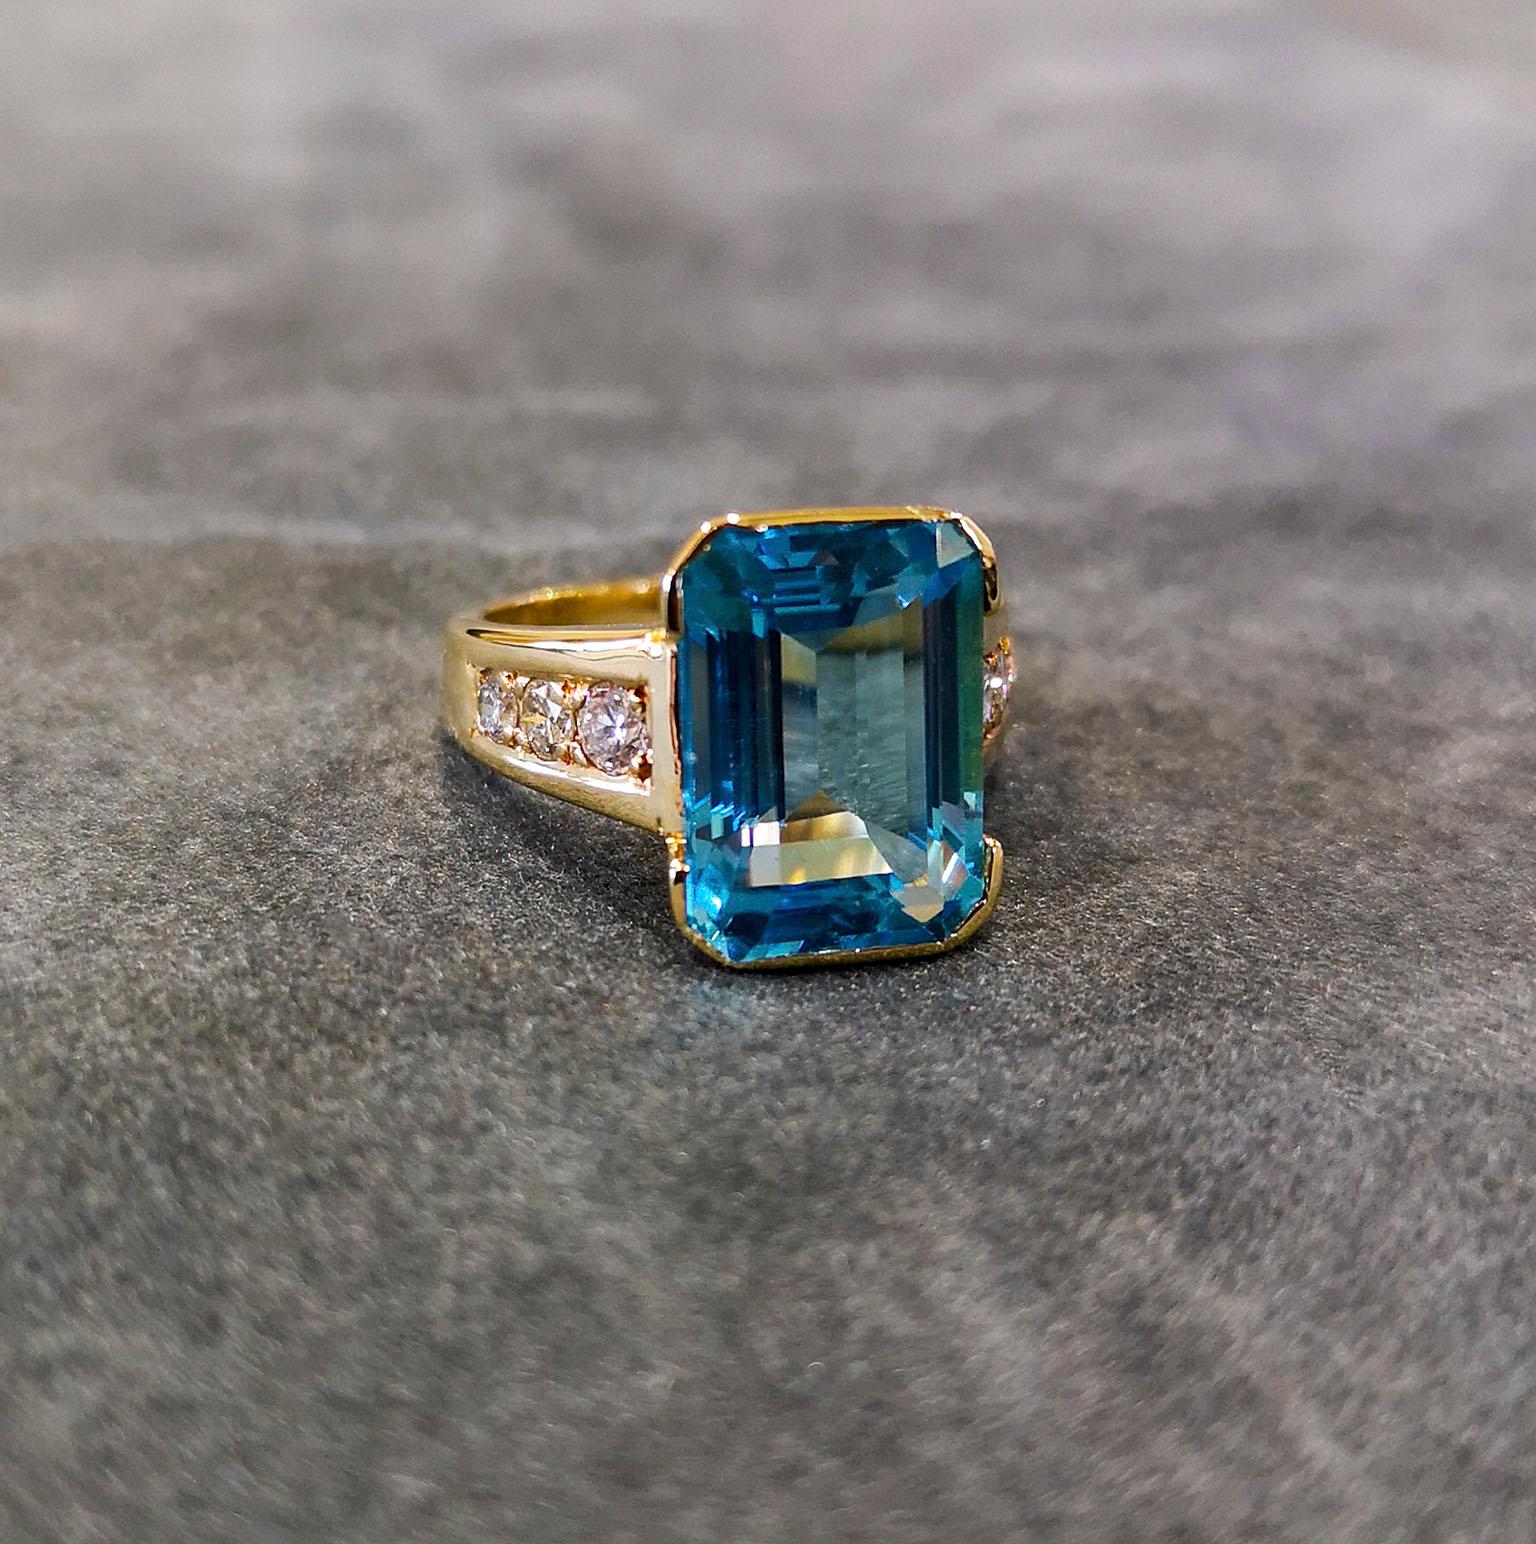  An astonishing, breath-taking 6.00 carat aquamarine featuring beautiful, sparkling blues, synonymous with gems from the famed Santa Maria mine. Mounted in a simple 18-carat yellow gold frame, with tapering shoulders, each set with graduated